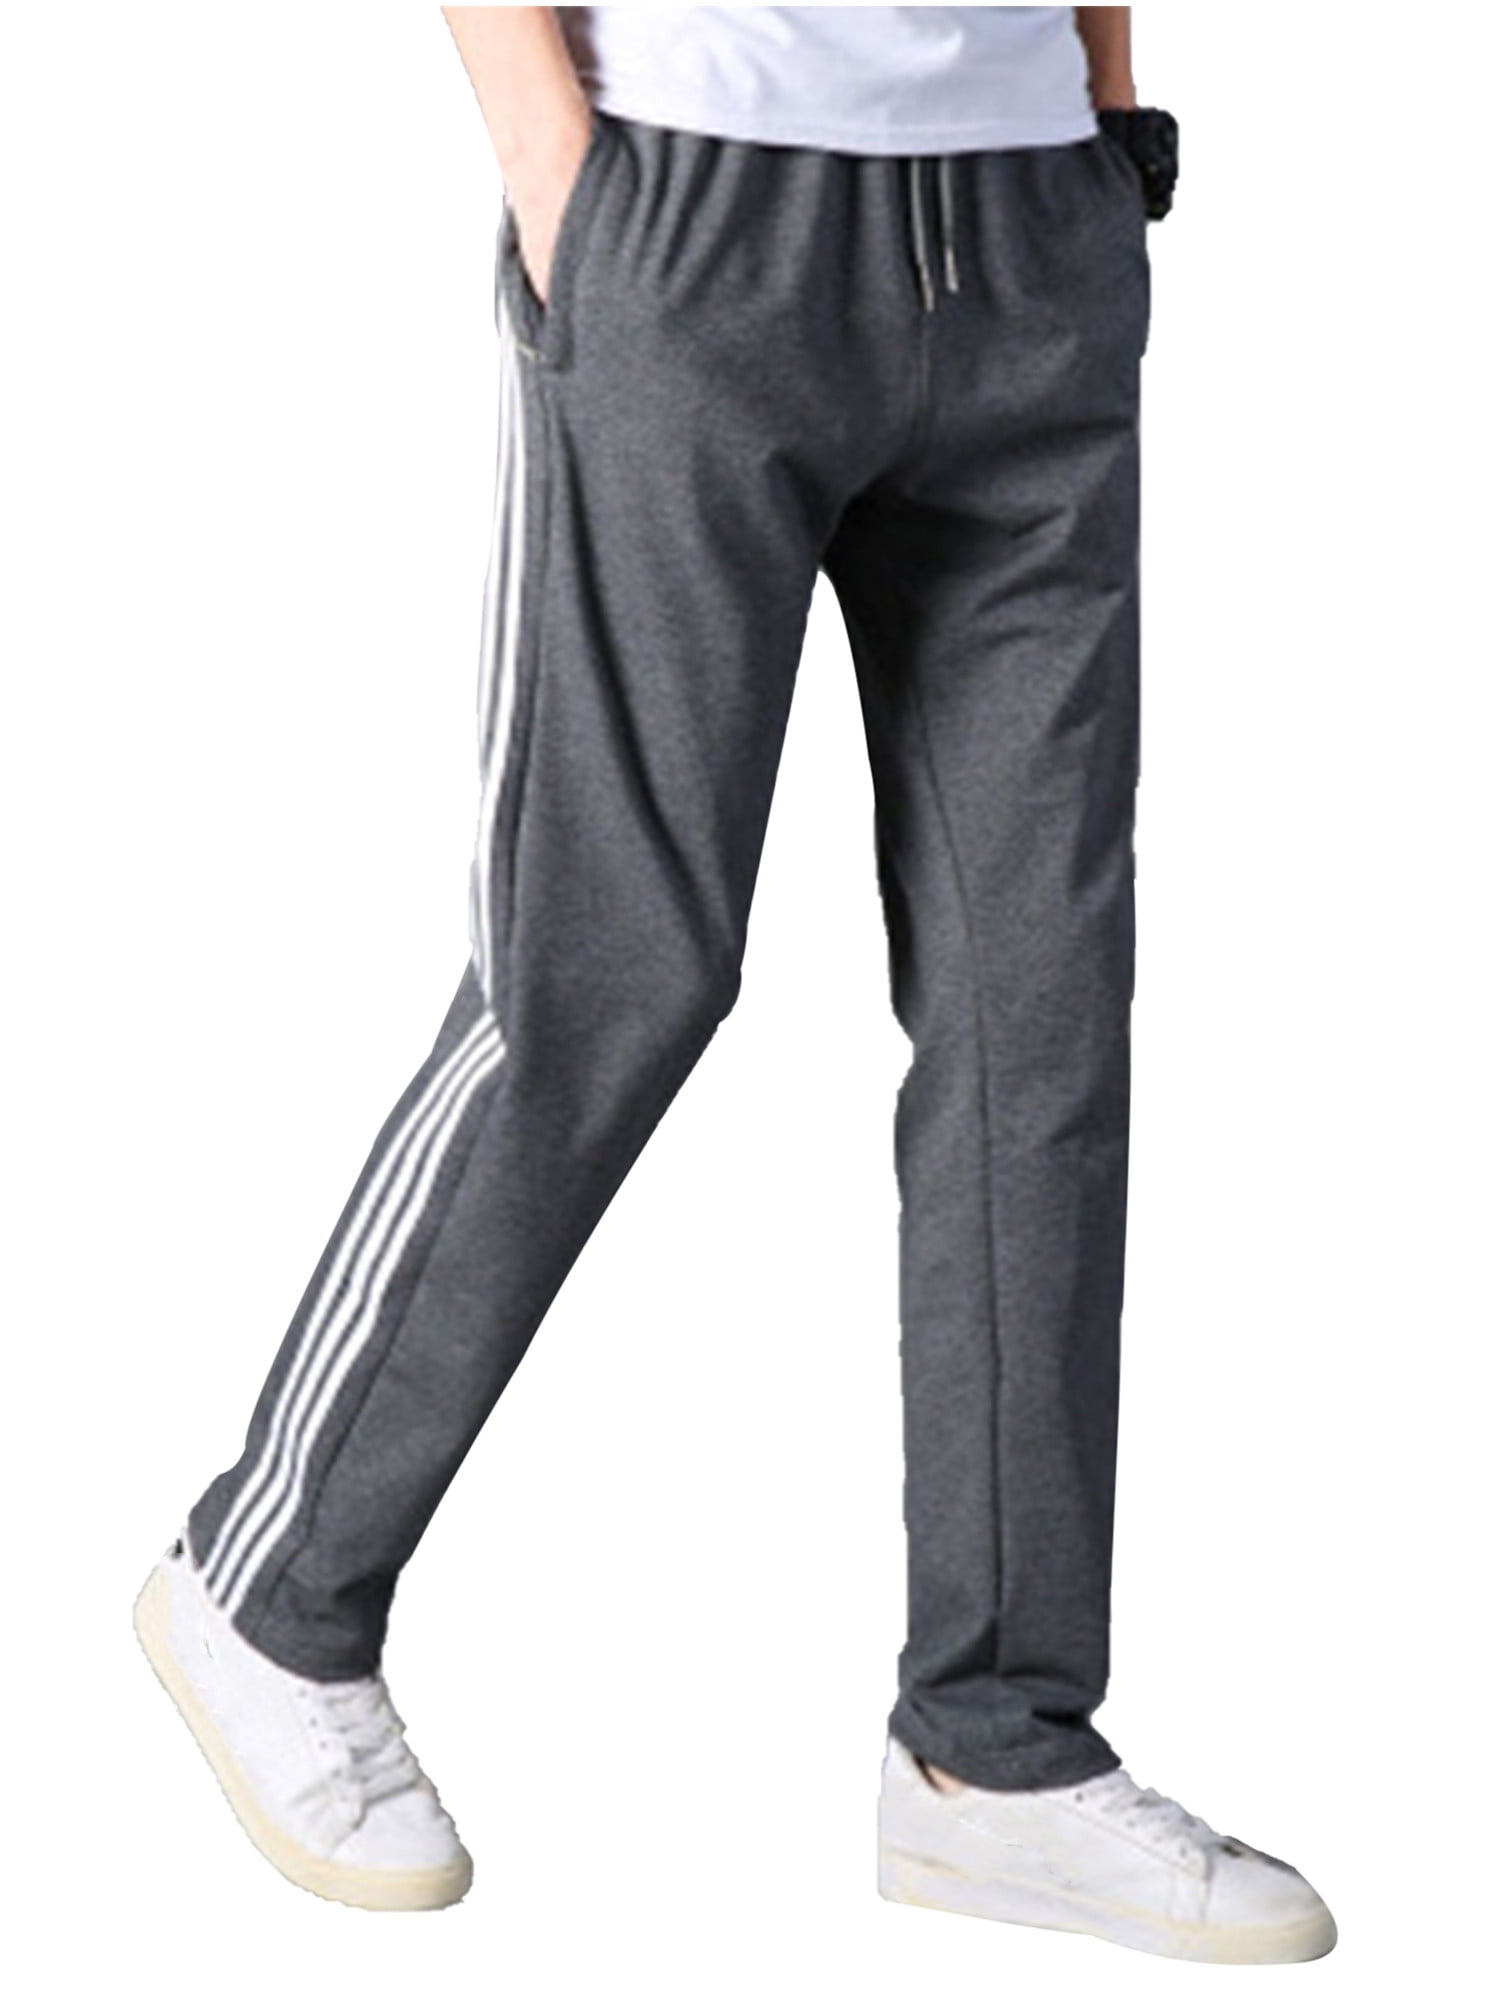 Men's Classic Side Stripes Zipper Pockets Sweatpants Straight Leg Track  Athletic Pants for Running Exercise Workout